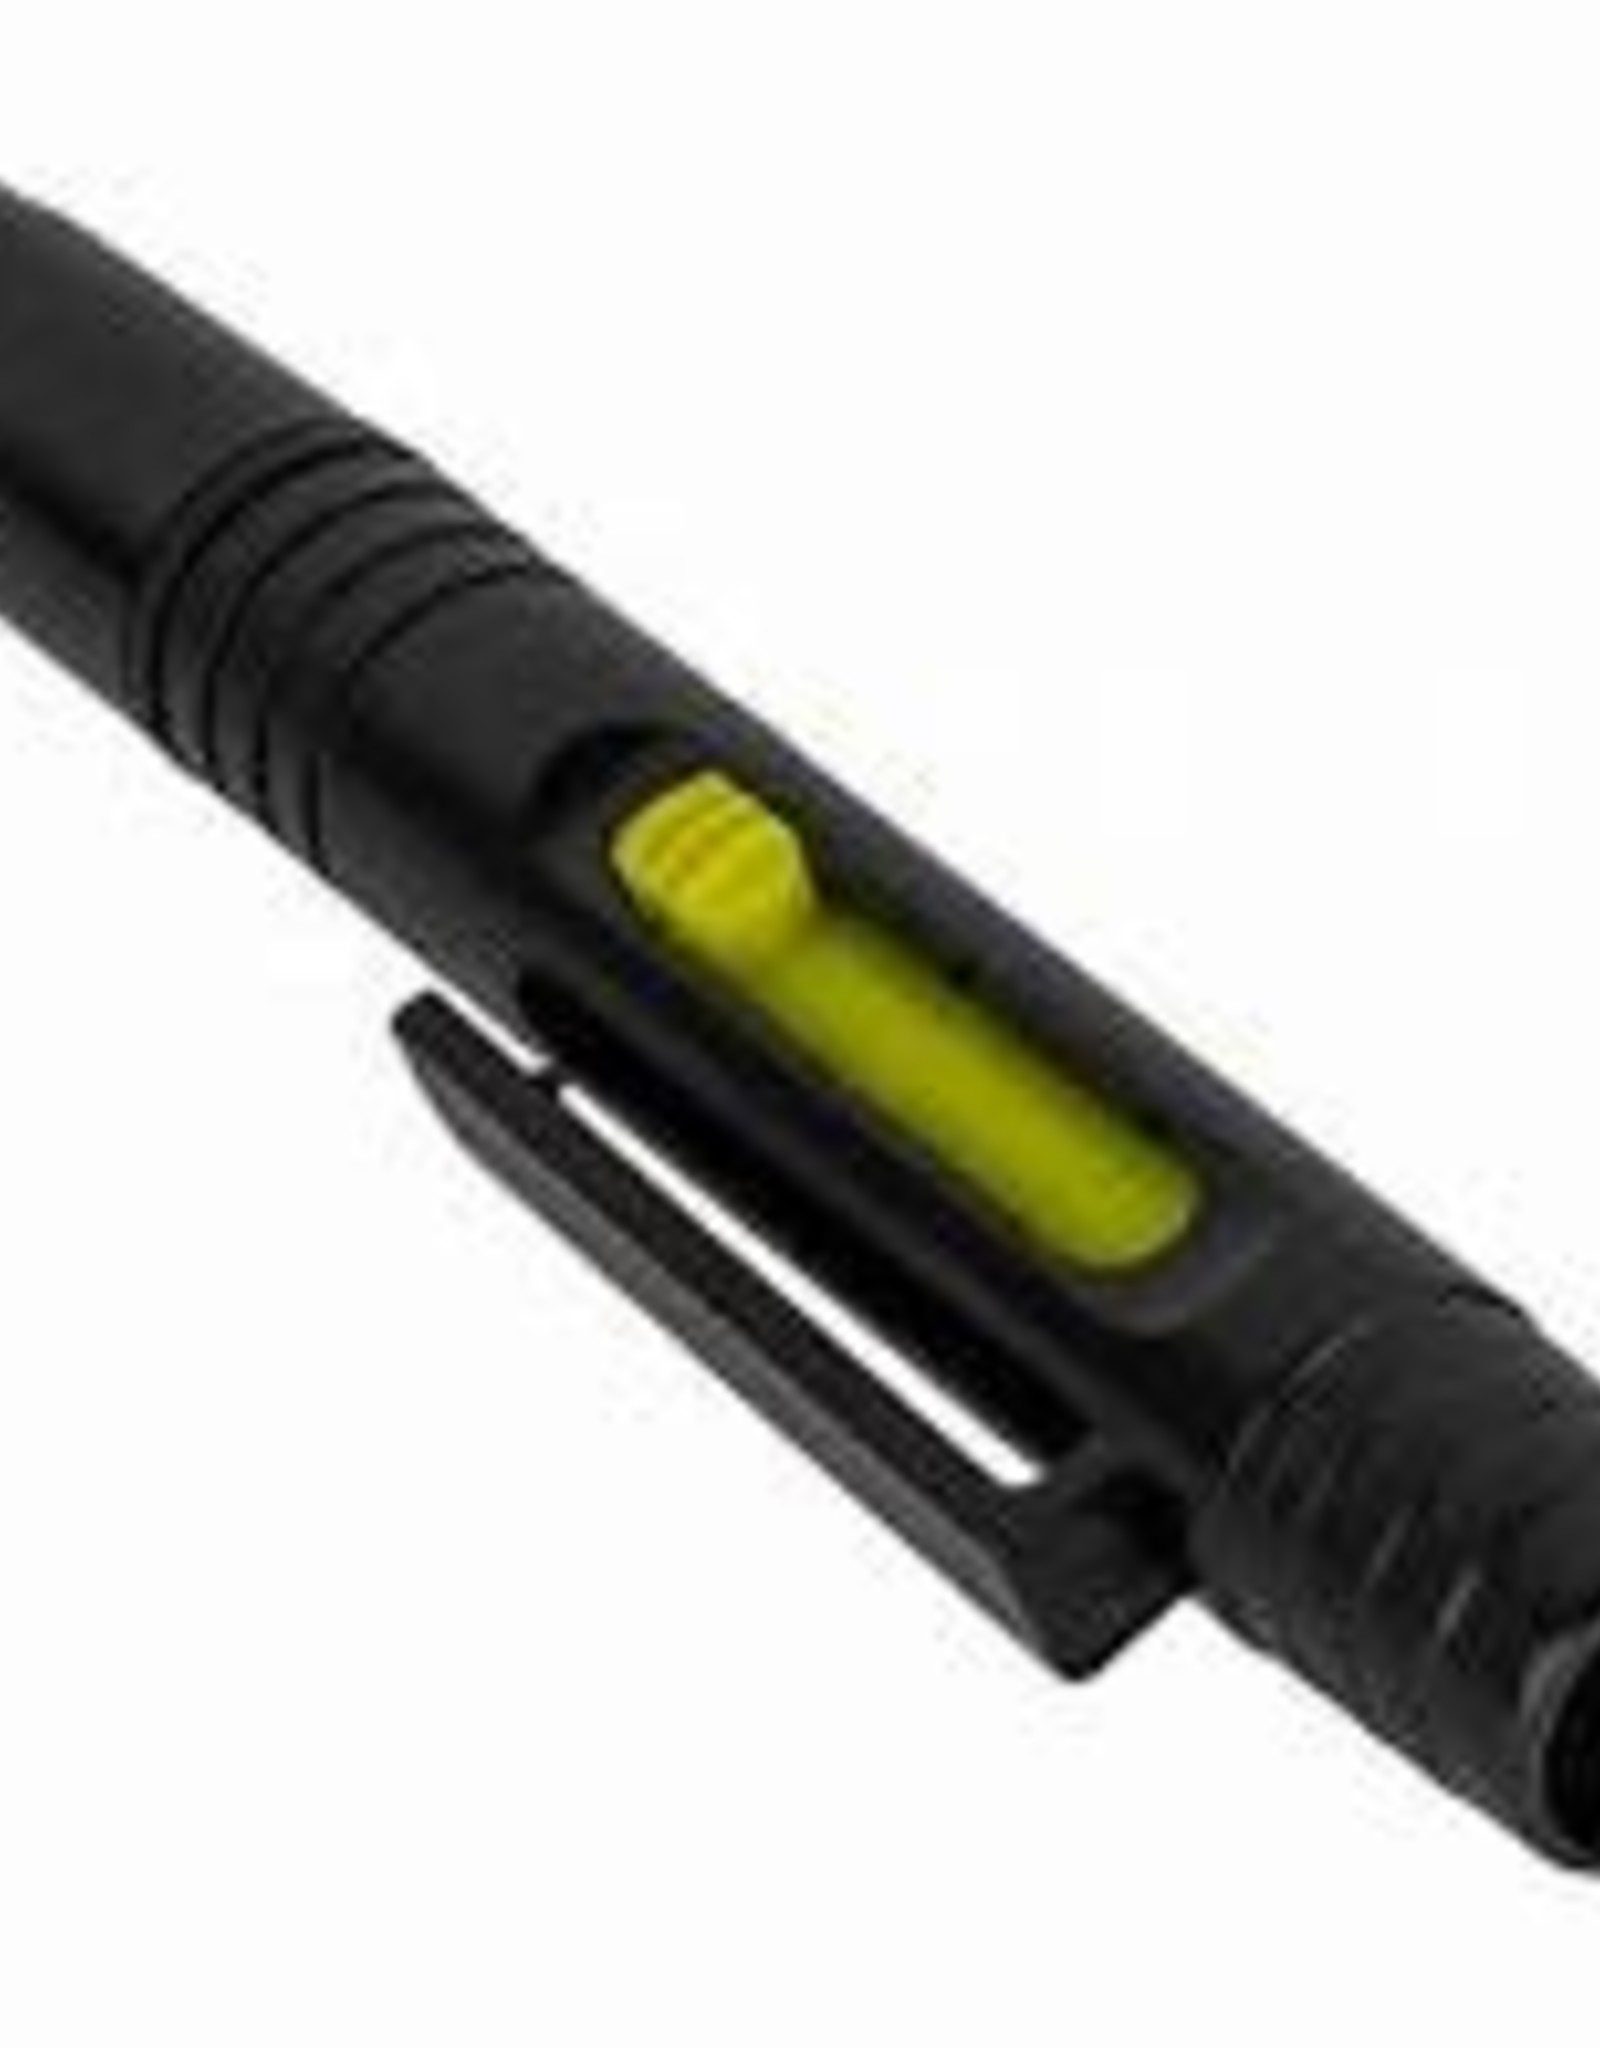 HME Compact Lens Cleaning Pen